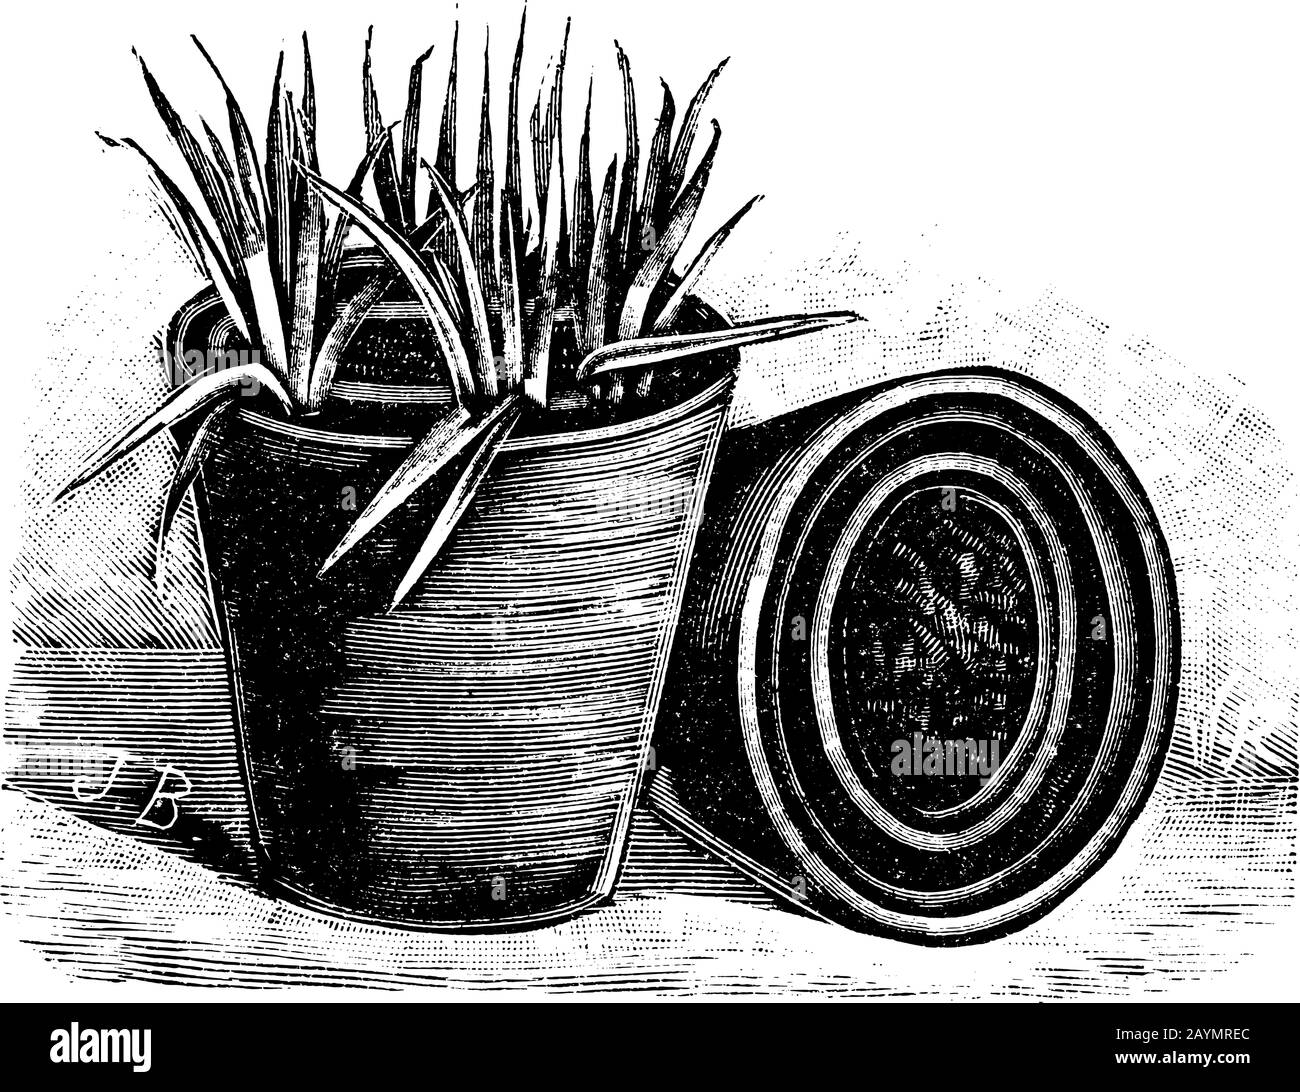 Antique vintage line art illustration, engraving or drawing of small plants in flower or plant pot. Concept of seeding, sowing, replanting or gardening. Stock Vector